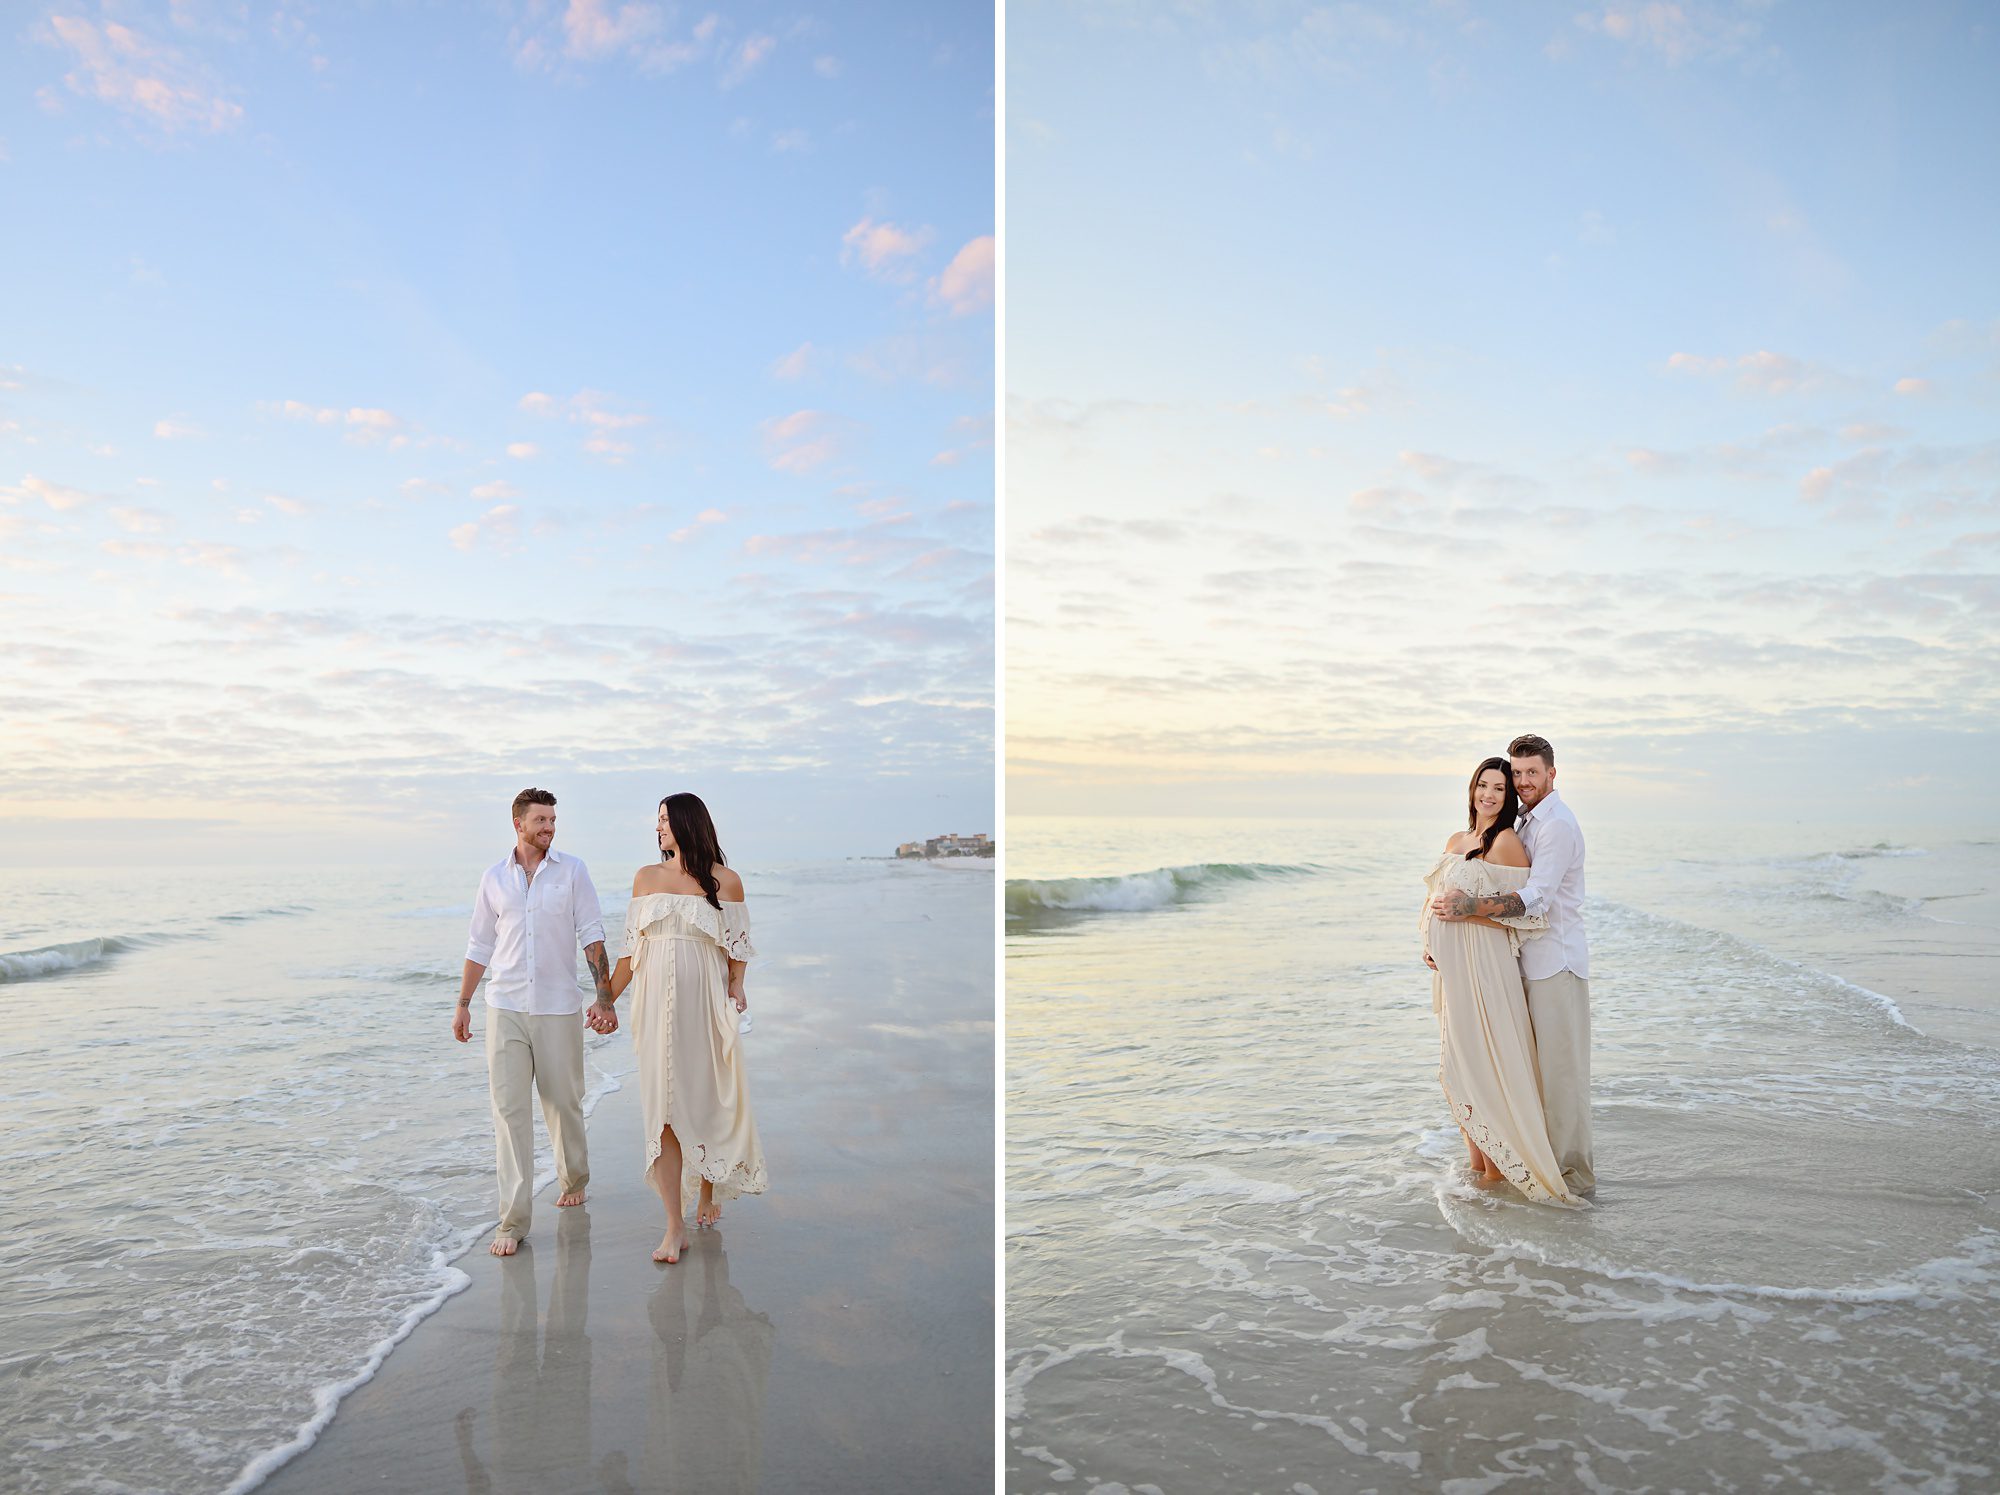 A young couple expecting their first baby get maternity portraits done at the beach at sunset.